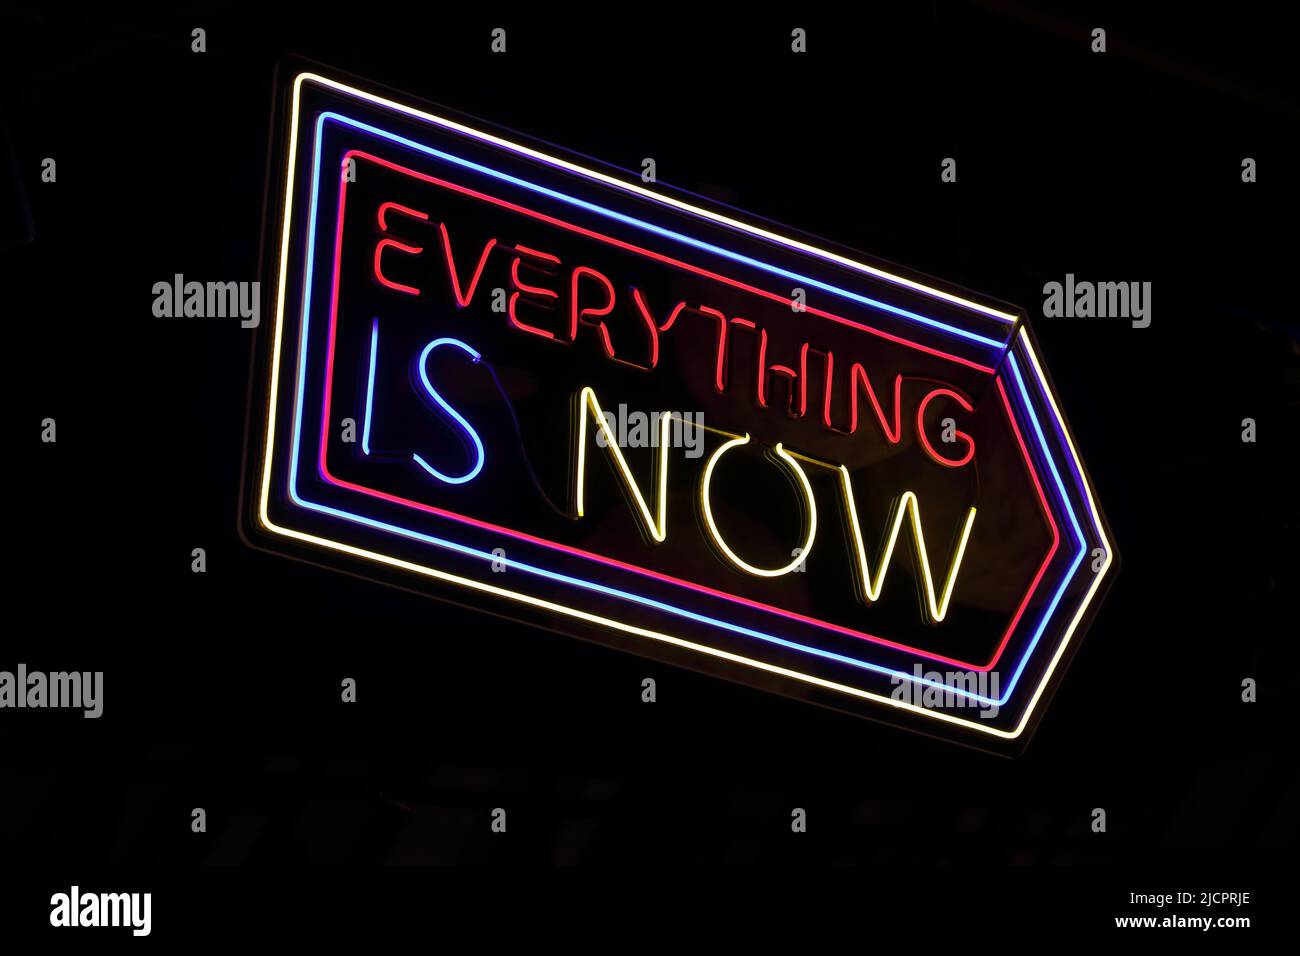 'Everything is now' neon sign Stock Photo